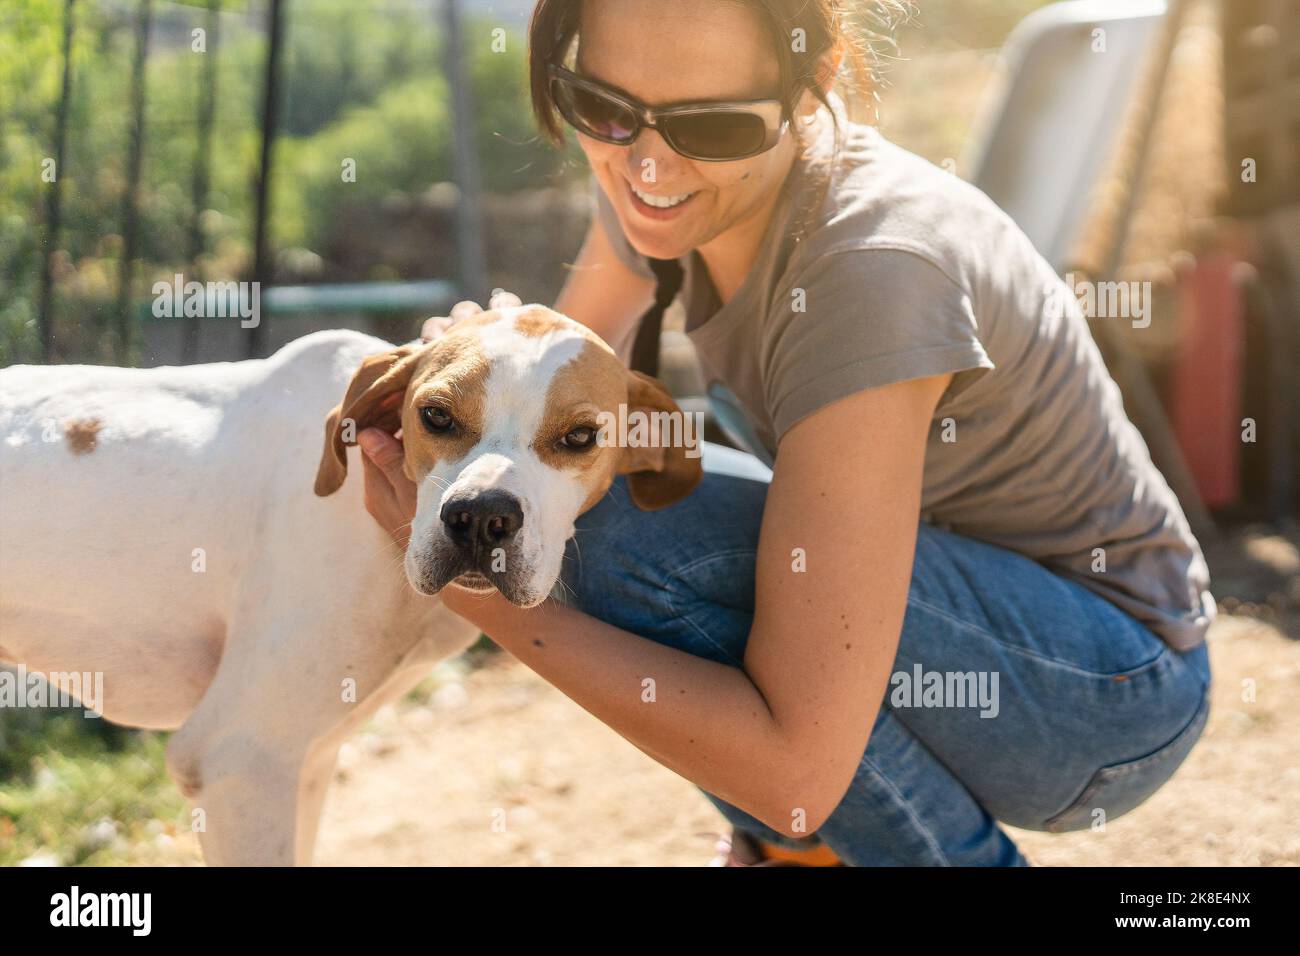 Portrait of a woman petting a dog Stock Photo